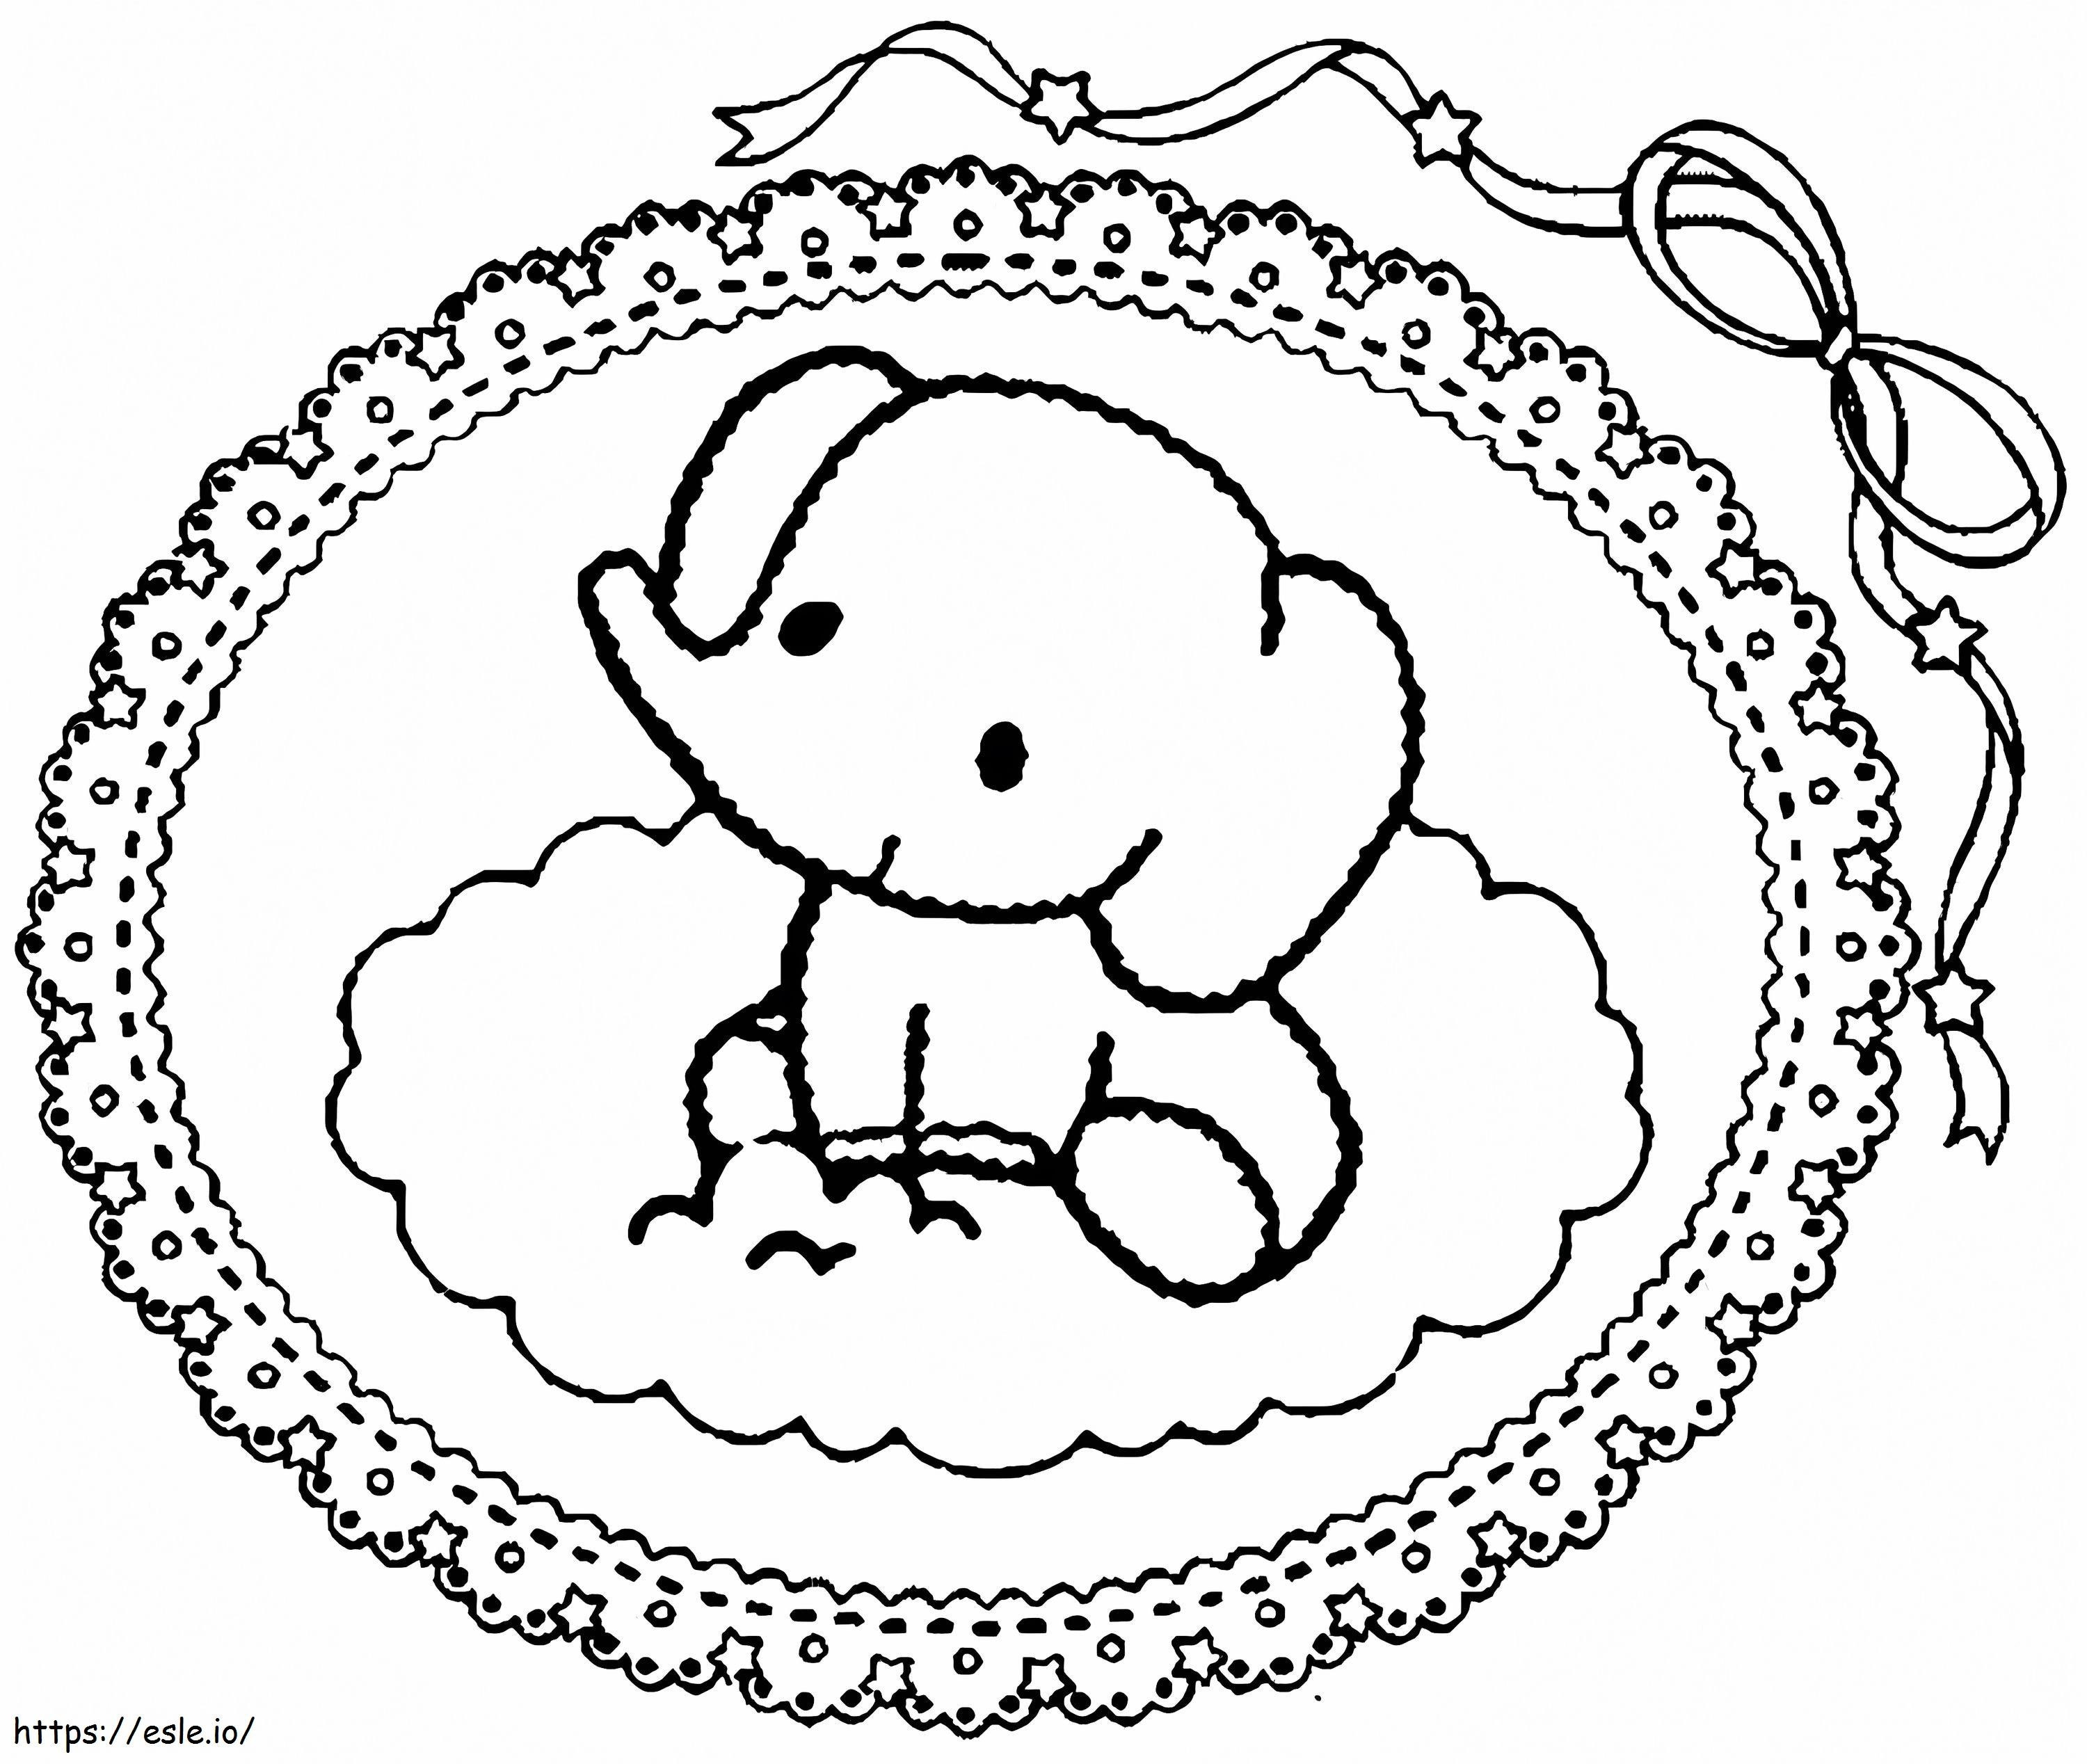 Little Twin Stars 8 coloring page